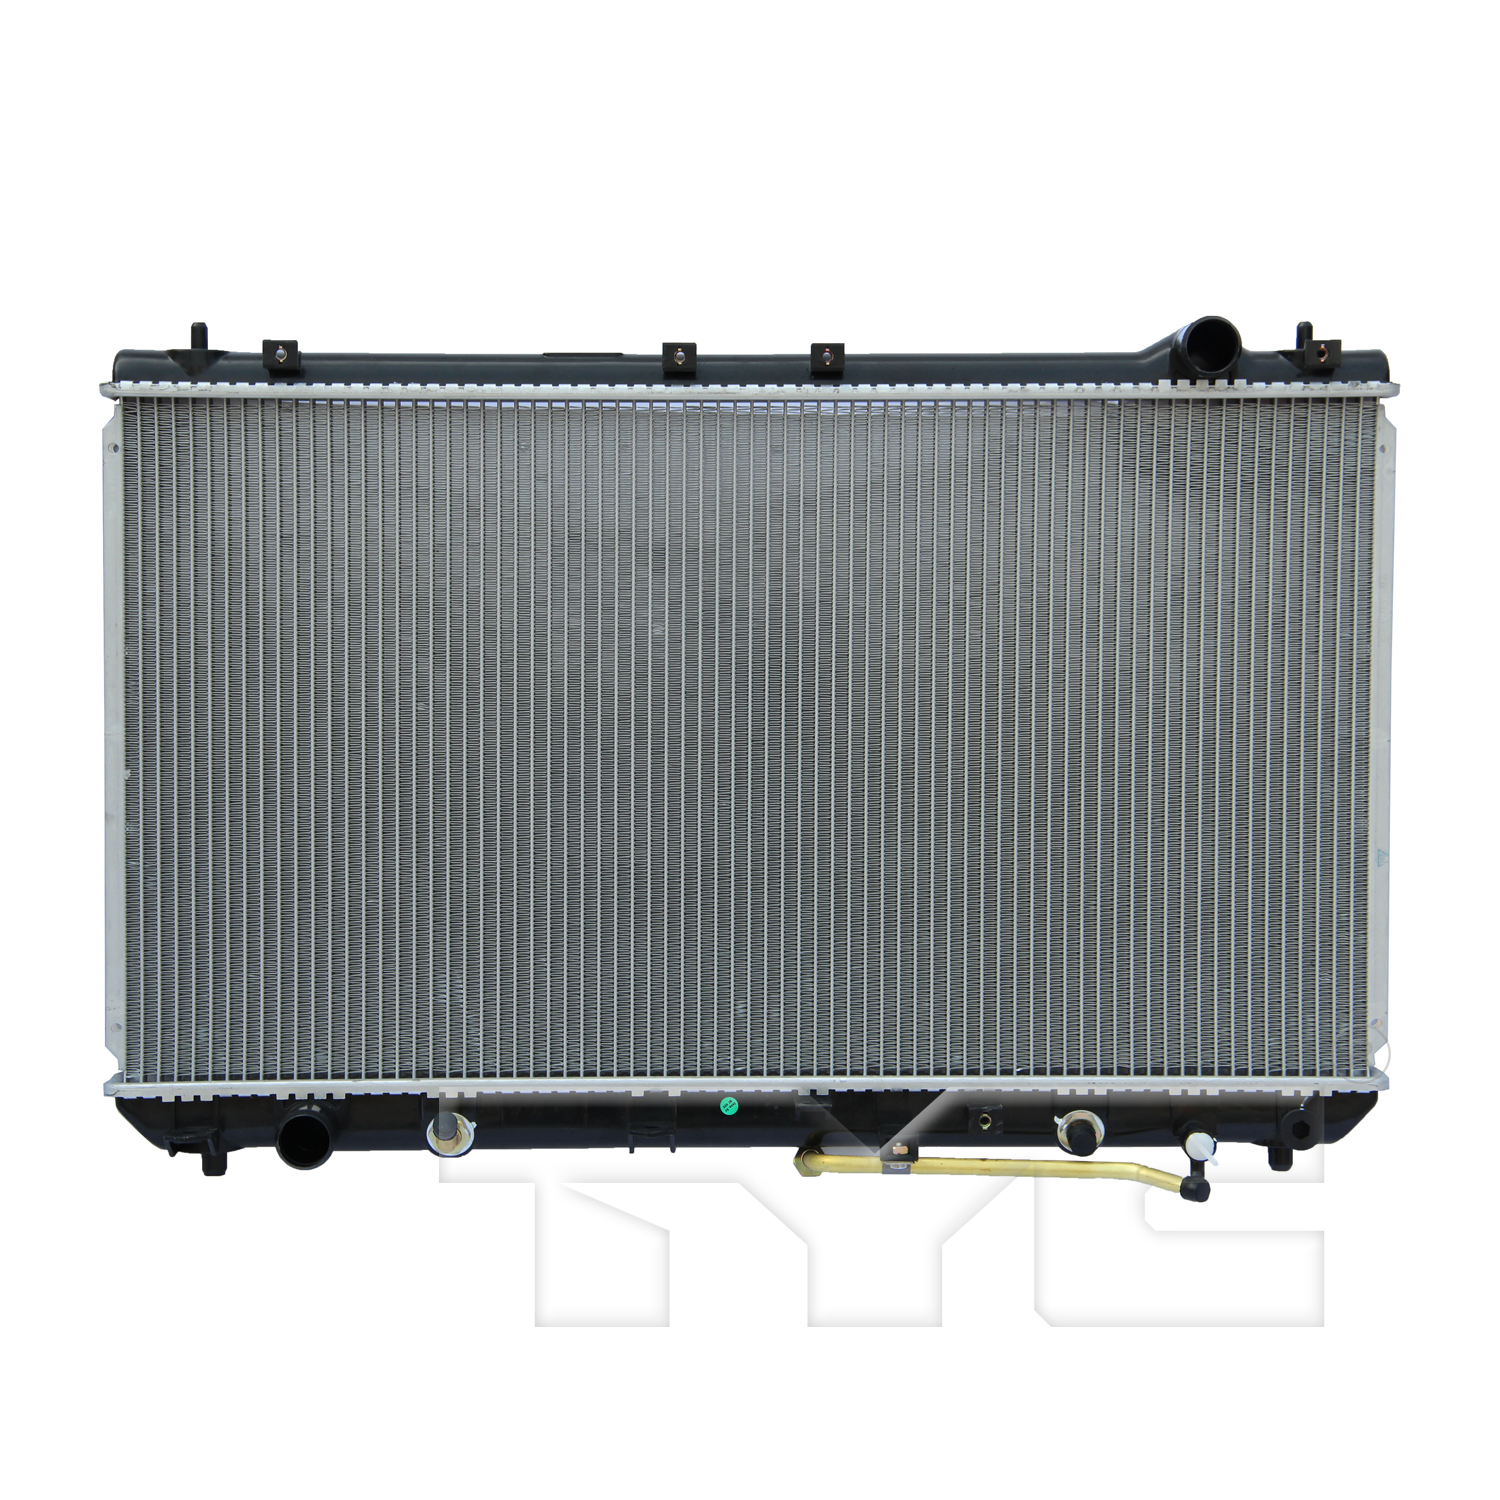 Aftermarket RADIATORS for TOYOTA - CAMRY, CAMRY,00-01,Radiator assembly